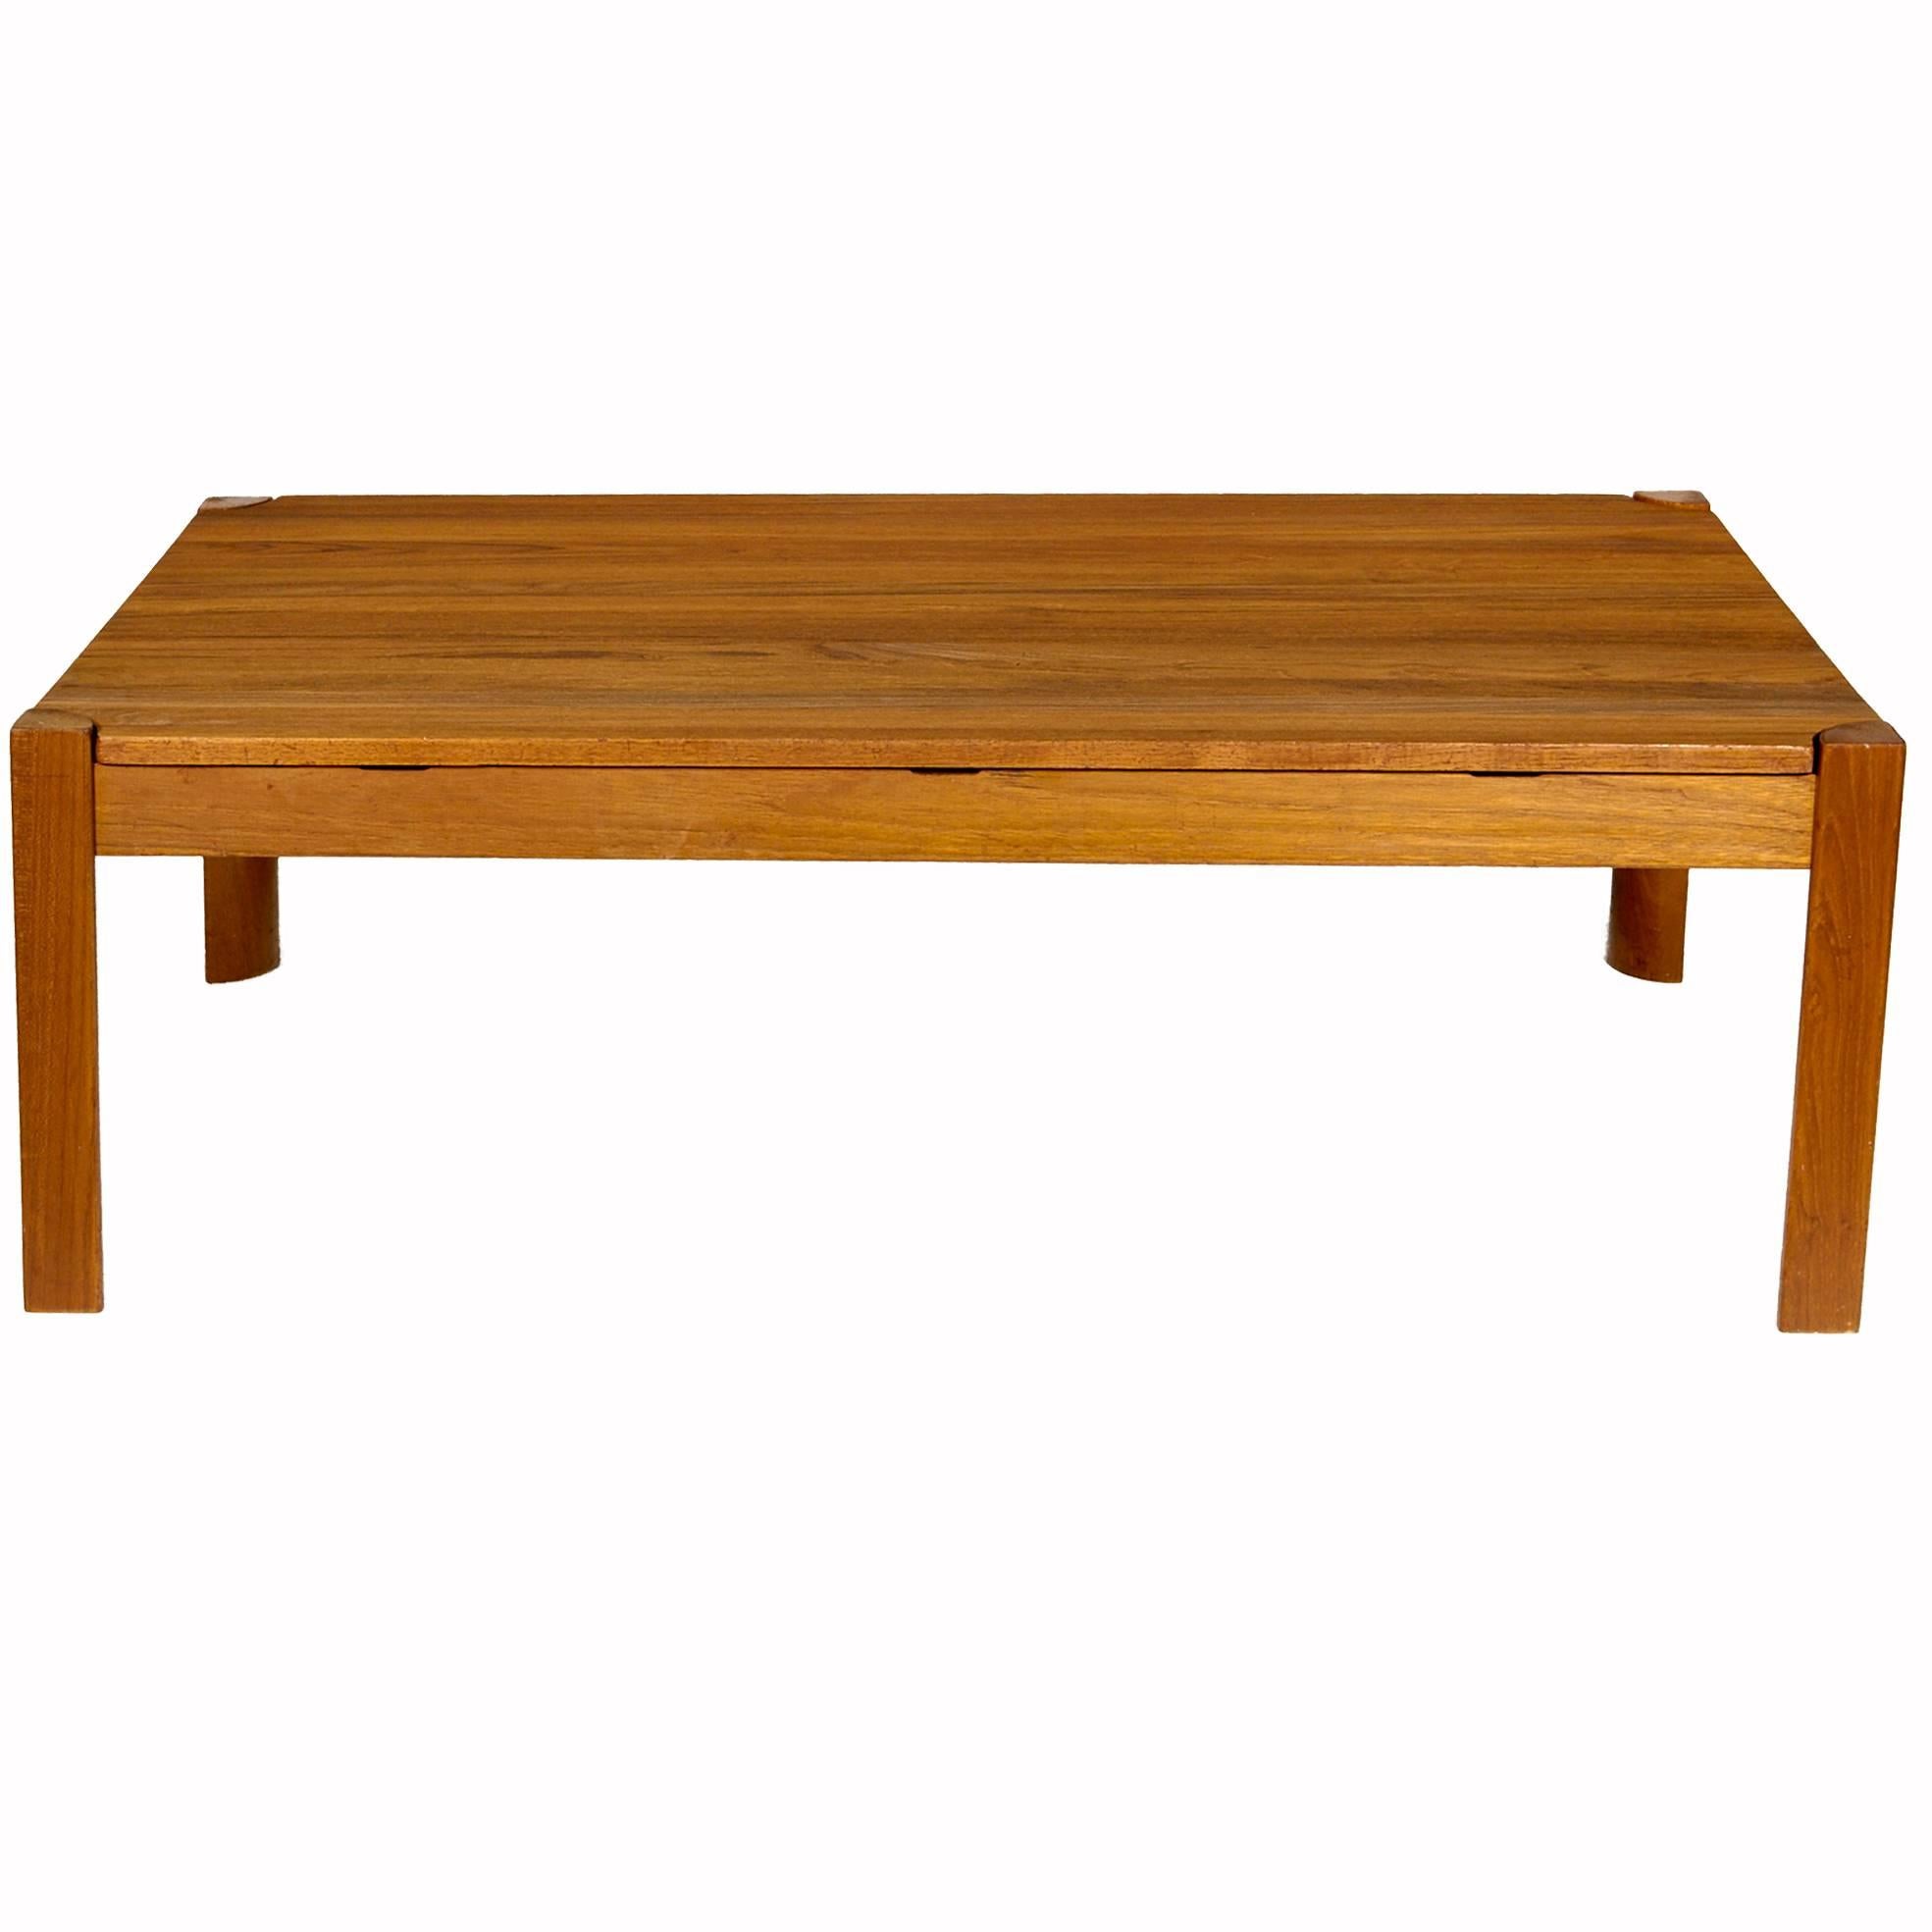 20th Century Danish Solid Teak Reversible Top Coffee Table, 1960s For Sale